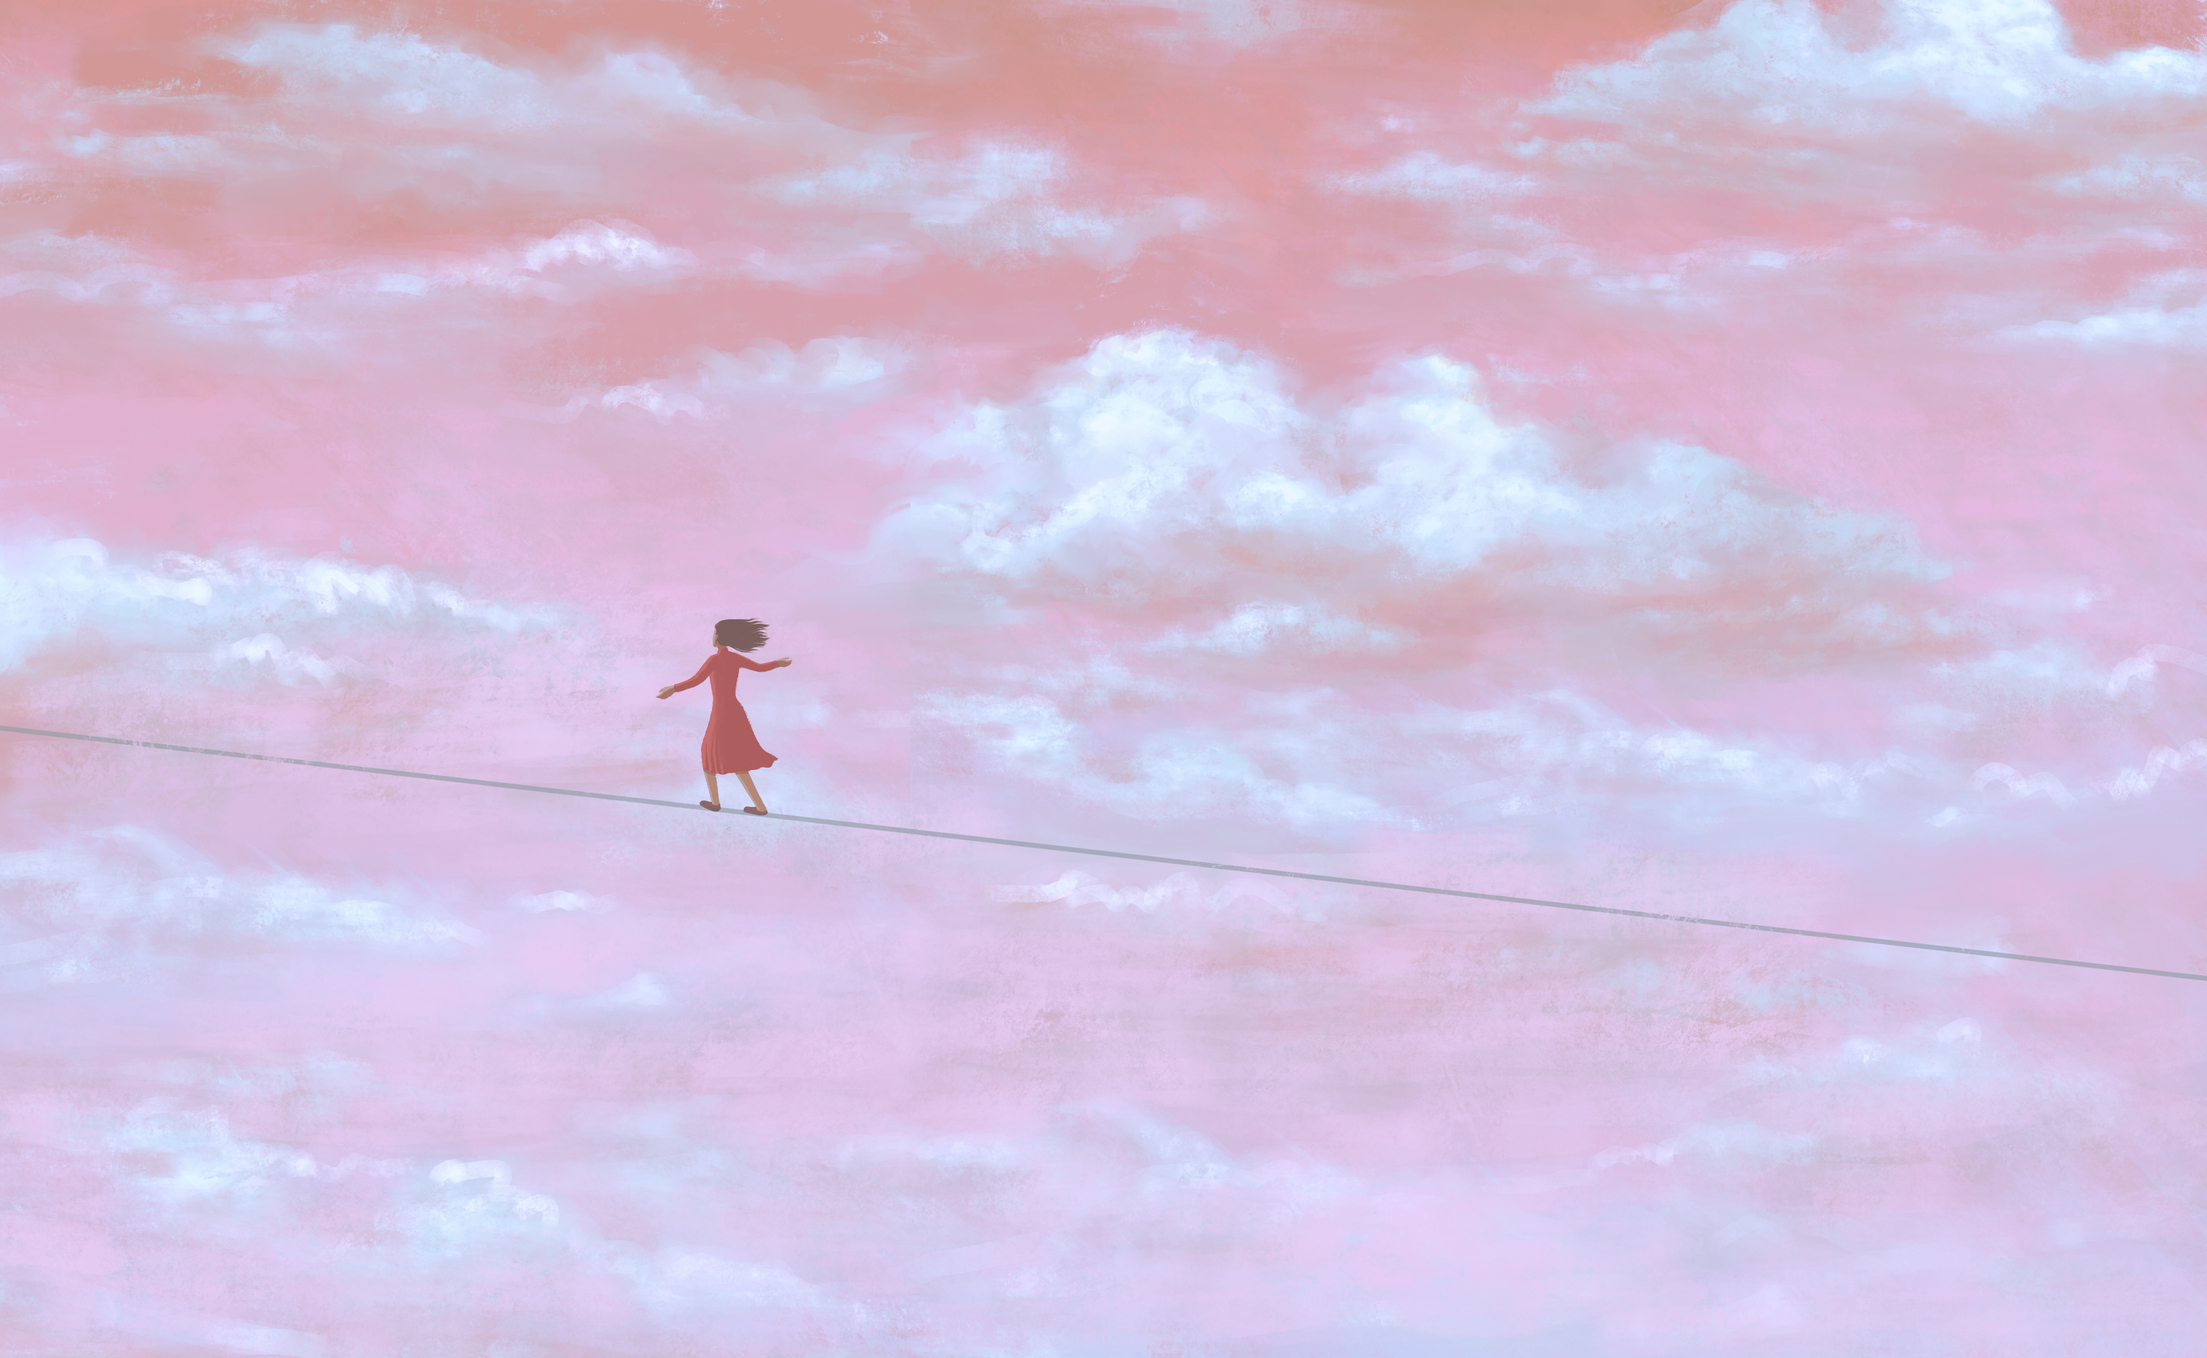 An illustration of a woman in a red dress, seen from far away, walking a tightrope in the sky, which is pink with white clouds.